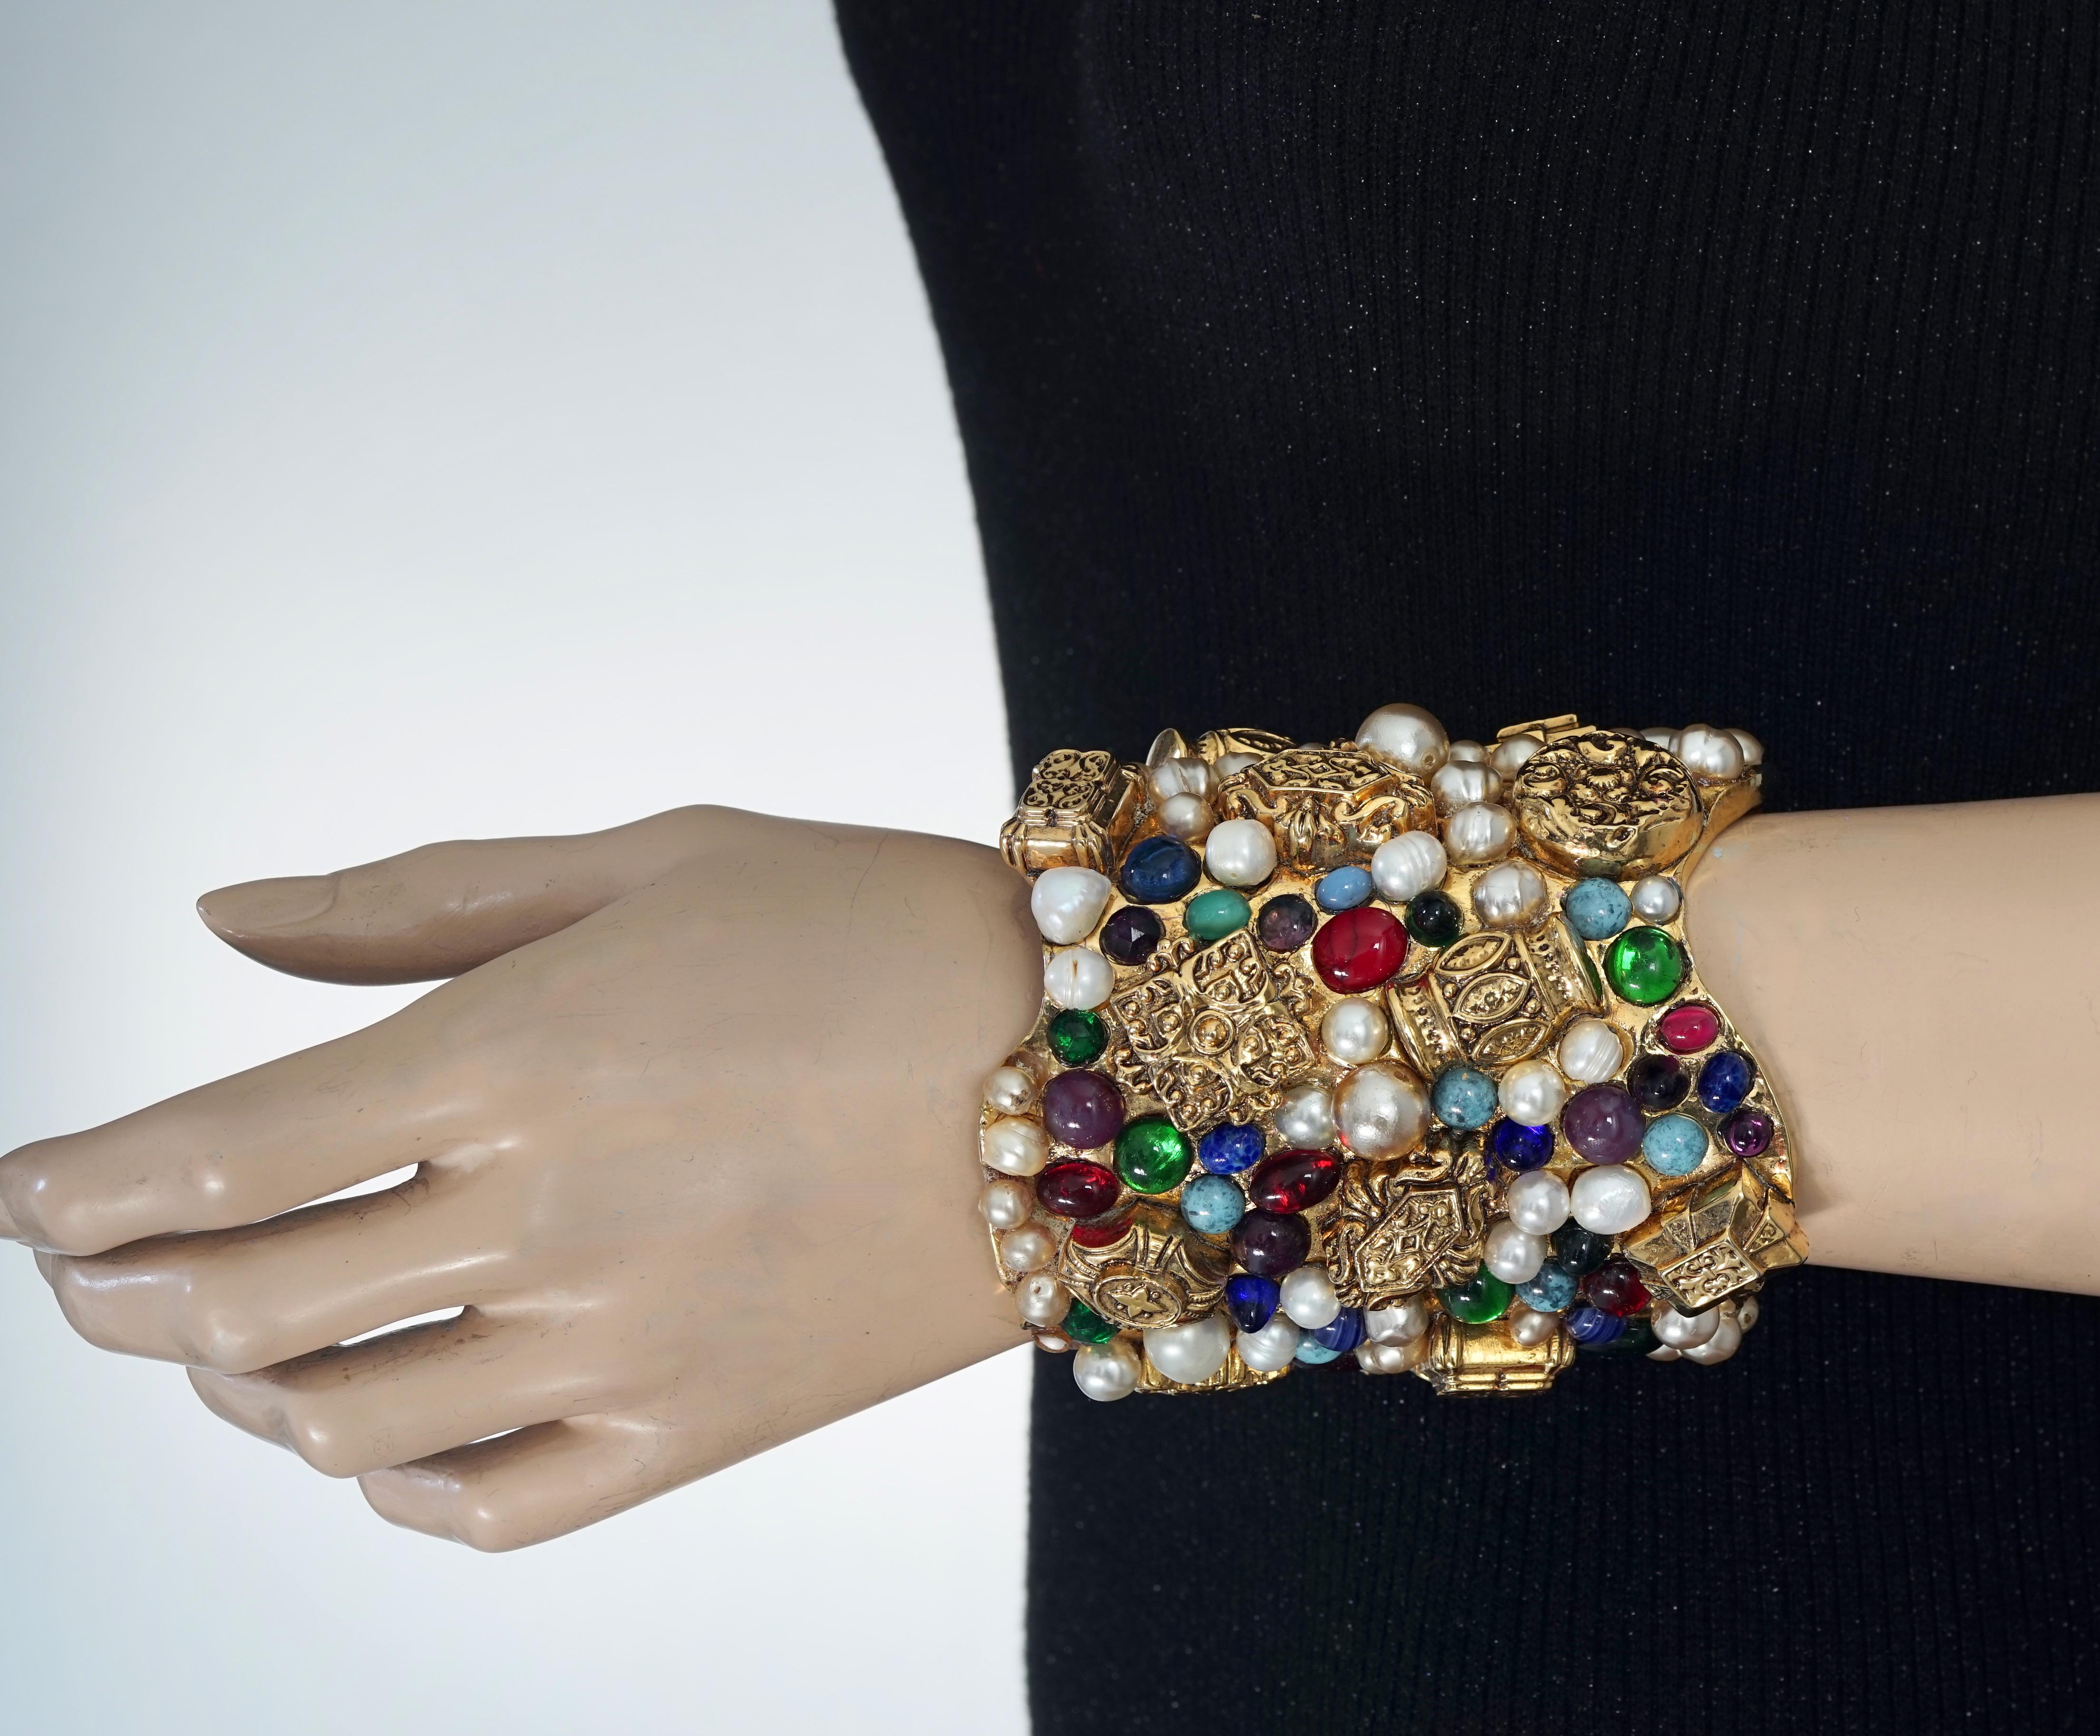 Vintage French Opulent Jewelled Cabochon Pearls Wide Cuff Bracelet

Measurements:
Height: 3.94 inches (10 cm)
Wearable Length: 6.69 inches (17 cm) includes opening

Features:
- Opulent wide, textured resin cuff studded with colourful cabochons and